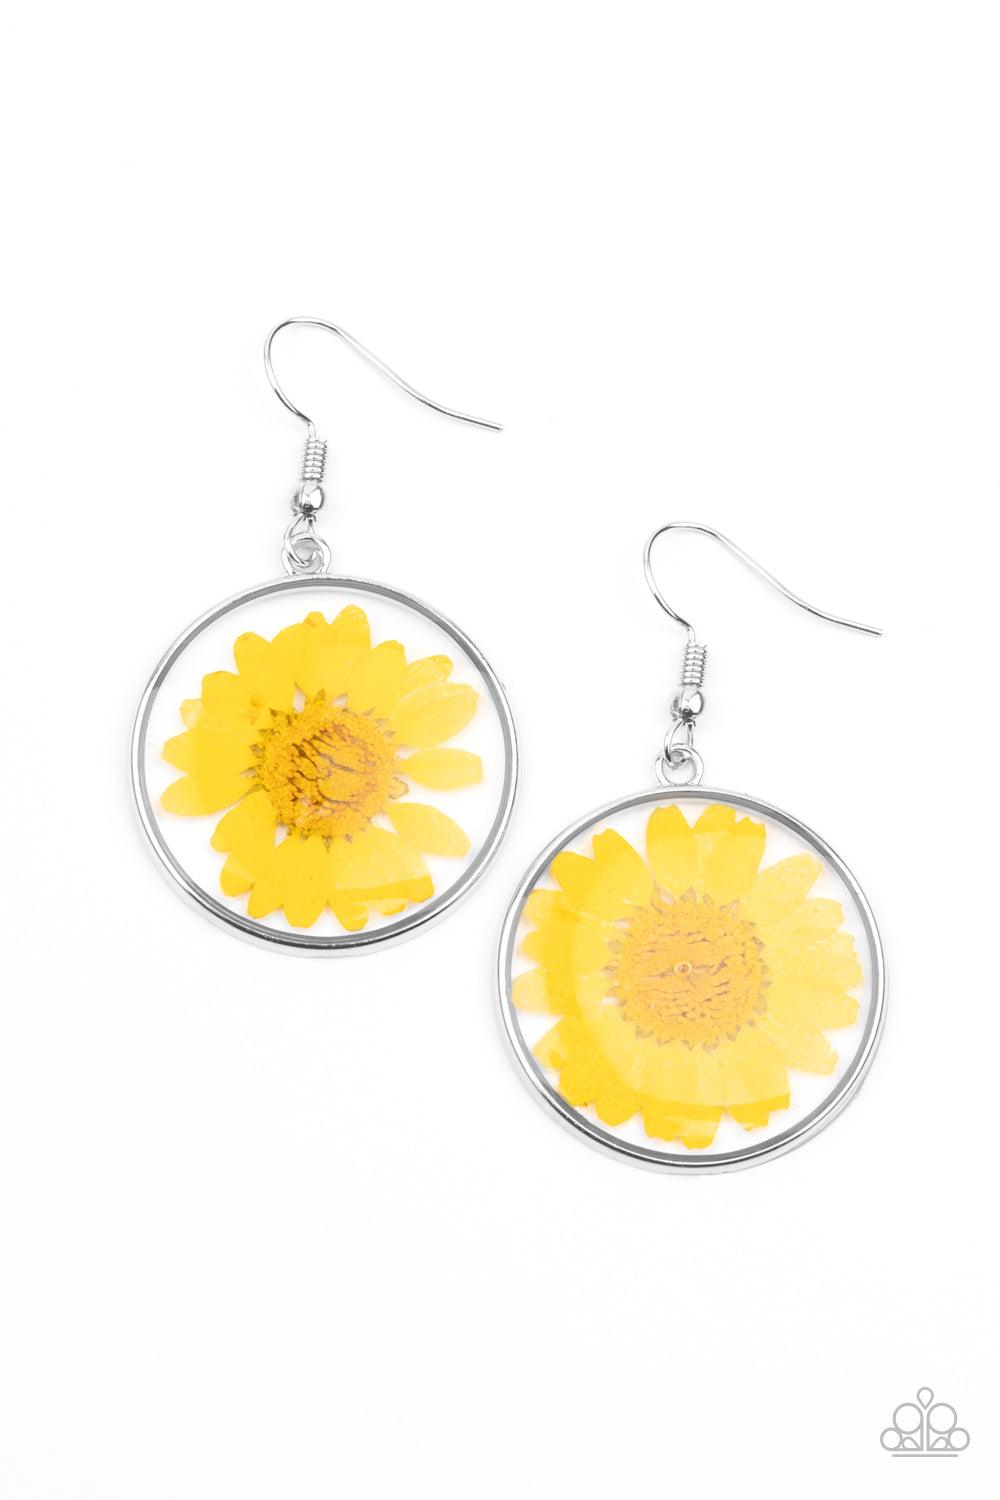 Paparazzi Accessories Forever Florals - Yellow Bordered in a silver fitting, a pressed yellow daisy is encased inside a glassy frame for an enchanted floral look. Earring attaches to a standard fishhook fitting. Sold as one pair of earrings. Jewelry